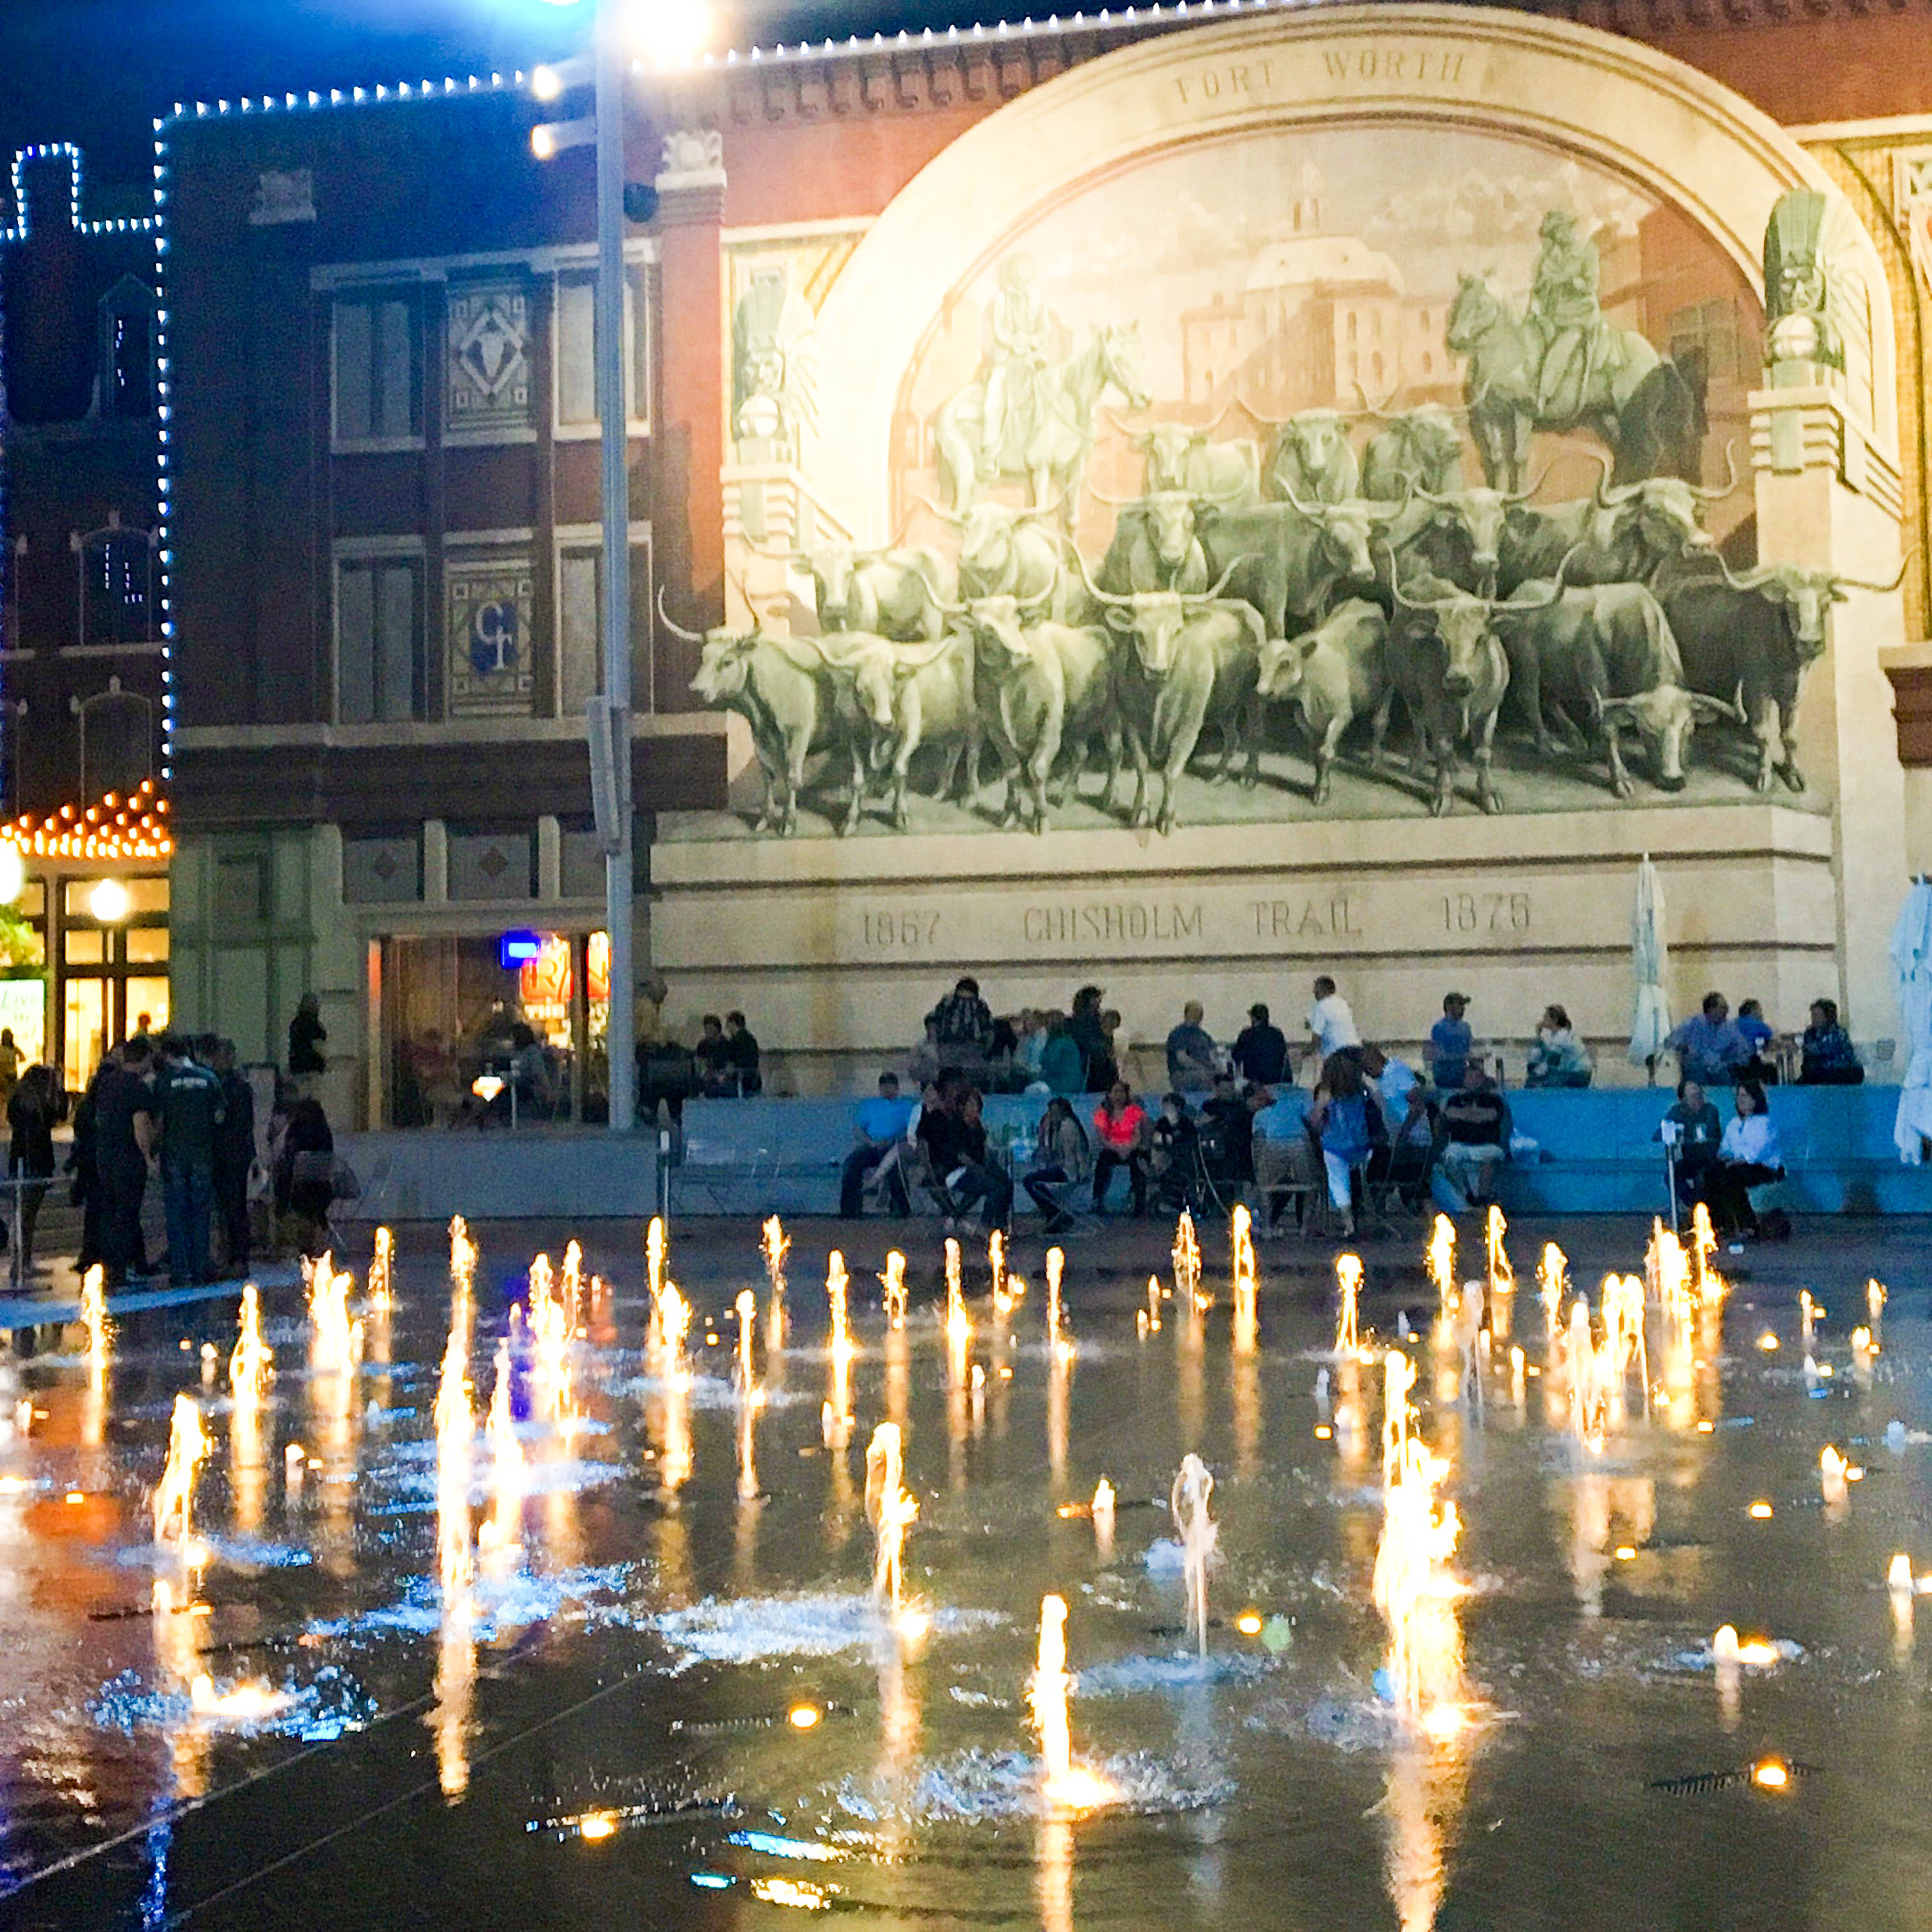 Fort Worth's Sundance Square at night when staying the weekend for the DFW Writers' Conference